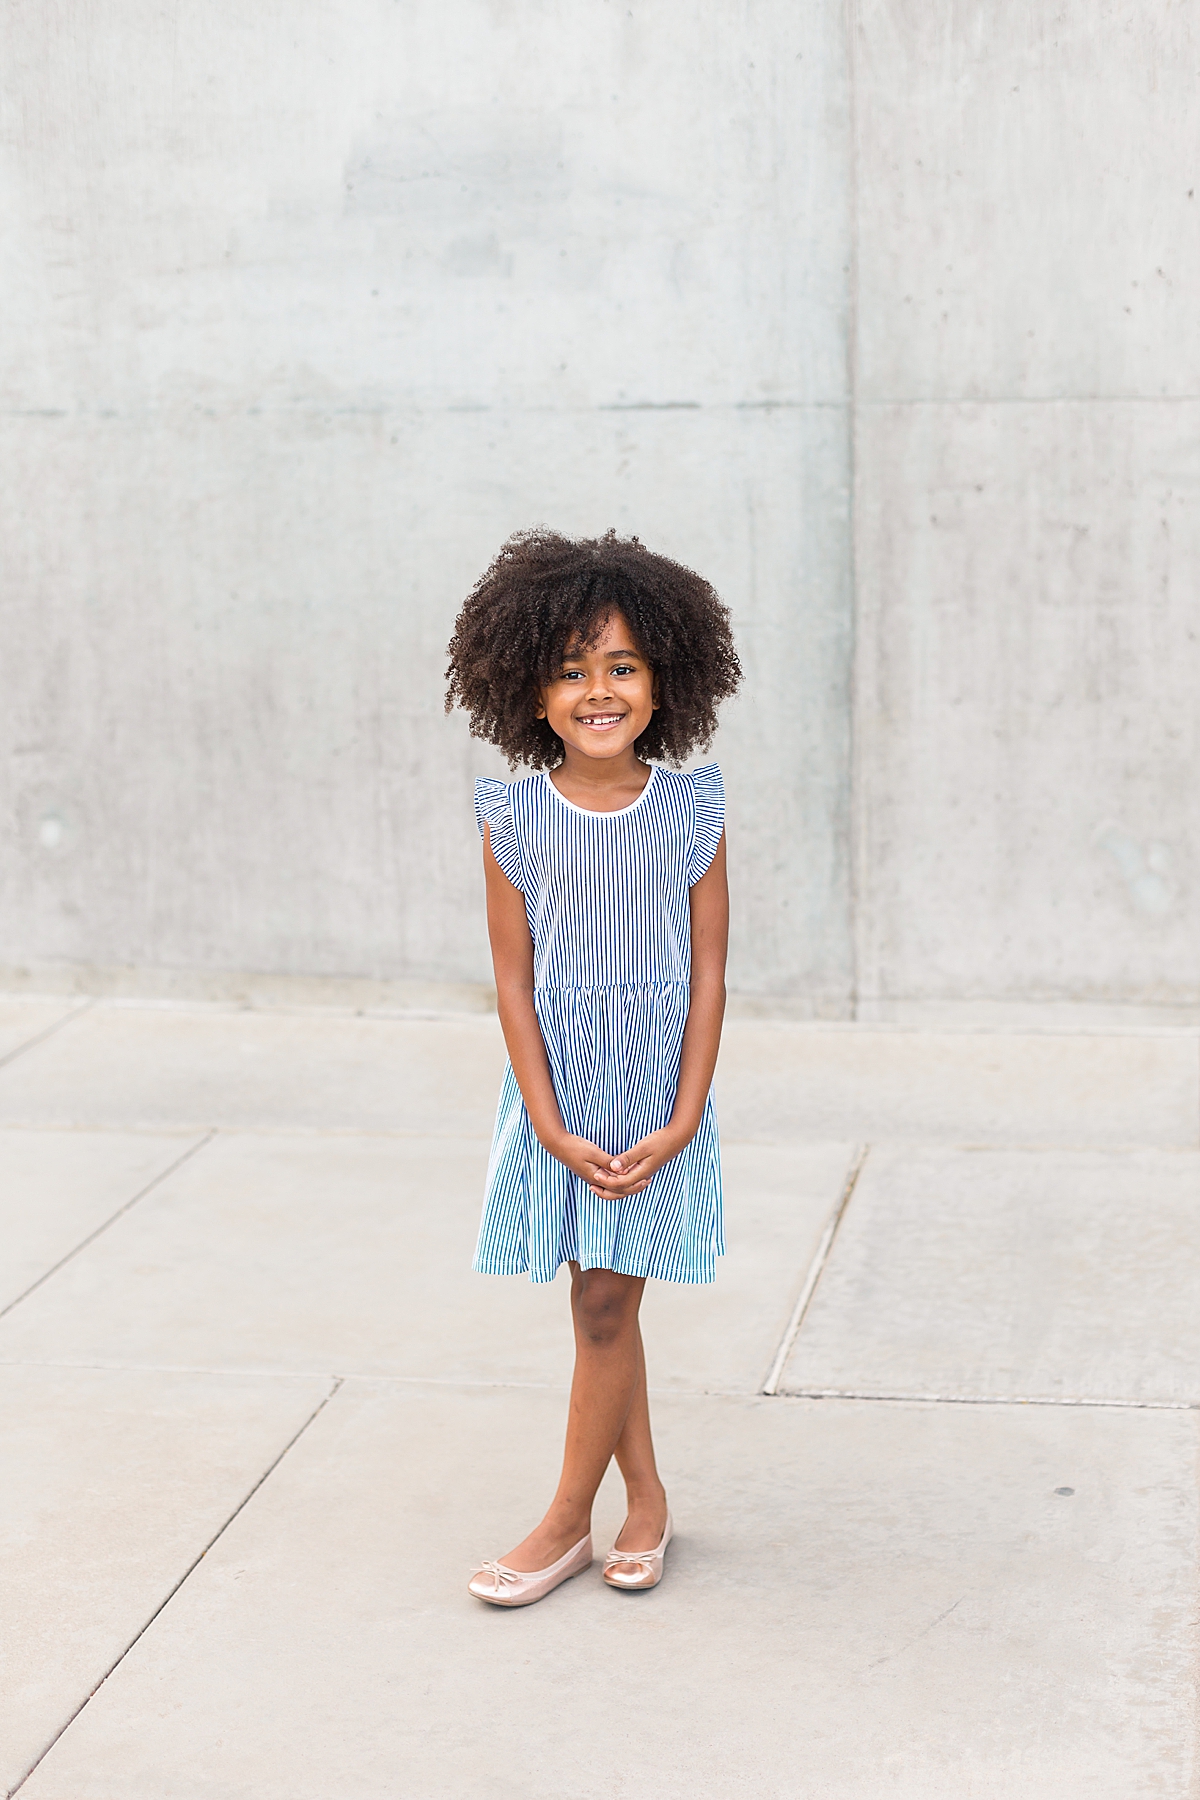 Leah Hope Photography | Downtown Phoenix Arizona Science Center | Phoenix Scottsdale Arizona Photographer | Head Shots Child Actor | Modeling Portraits | Classic Plain Background Head Shots for Children | What to Wear | Outfit and Styling Ideas